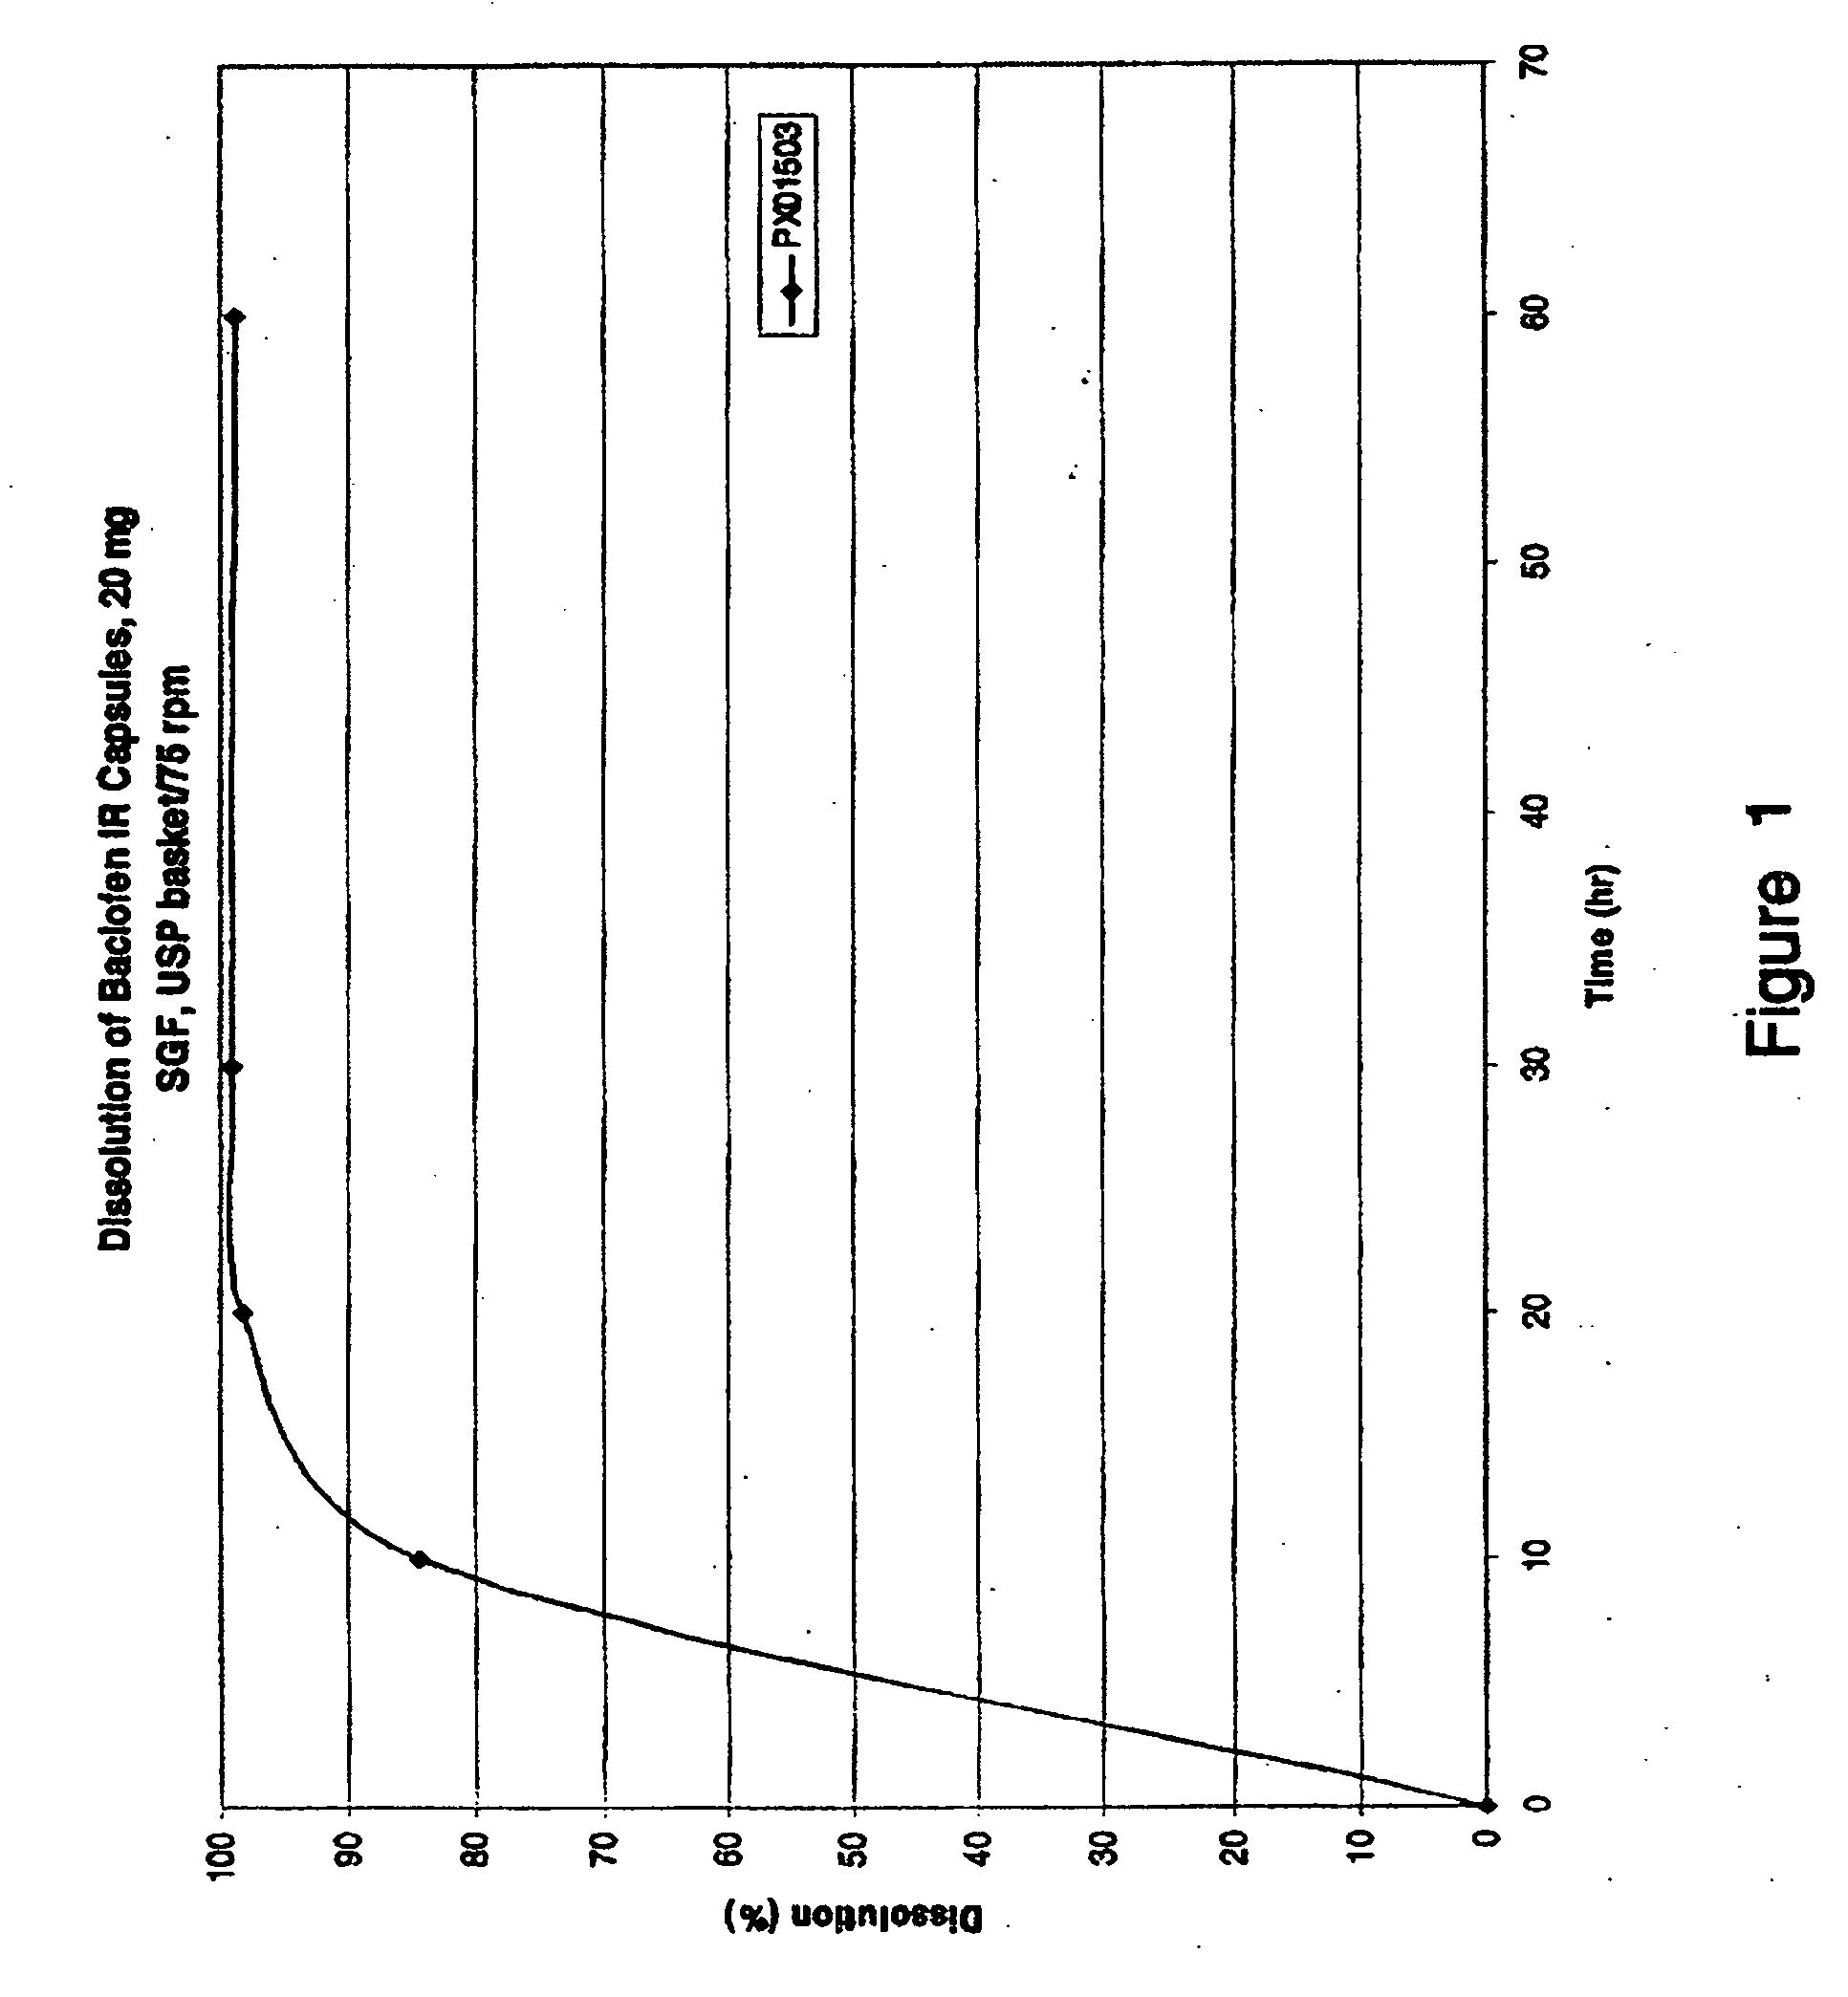 Pharmaceutical dosage forms having immediate release and/or controlled release properties